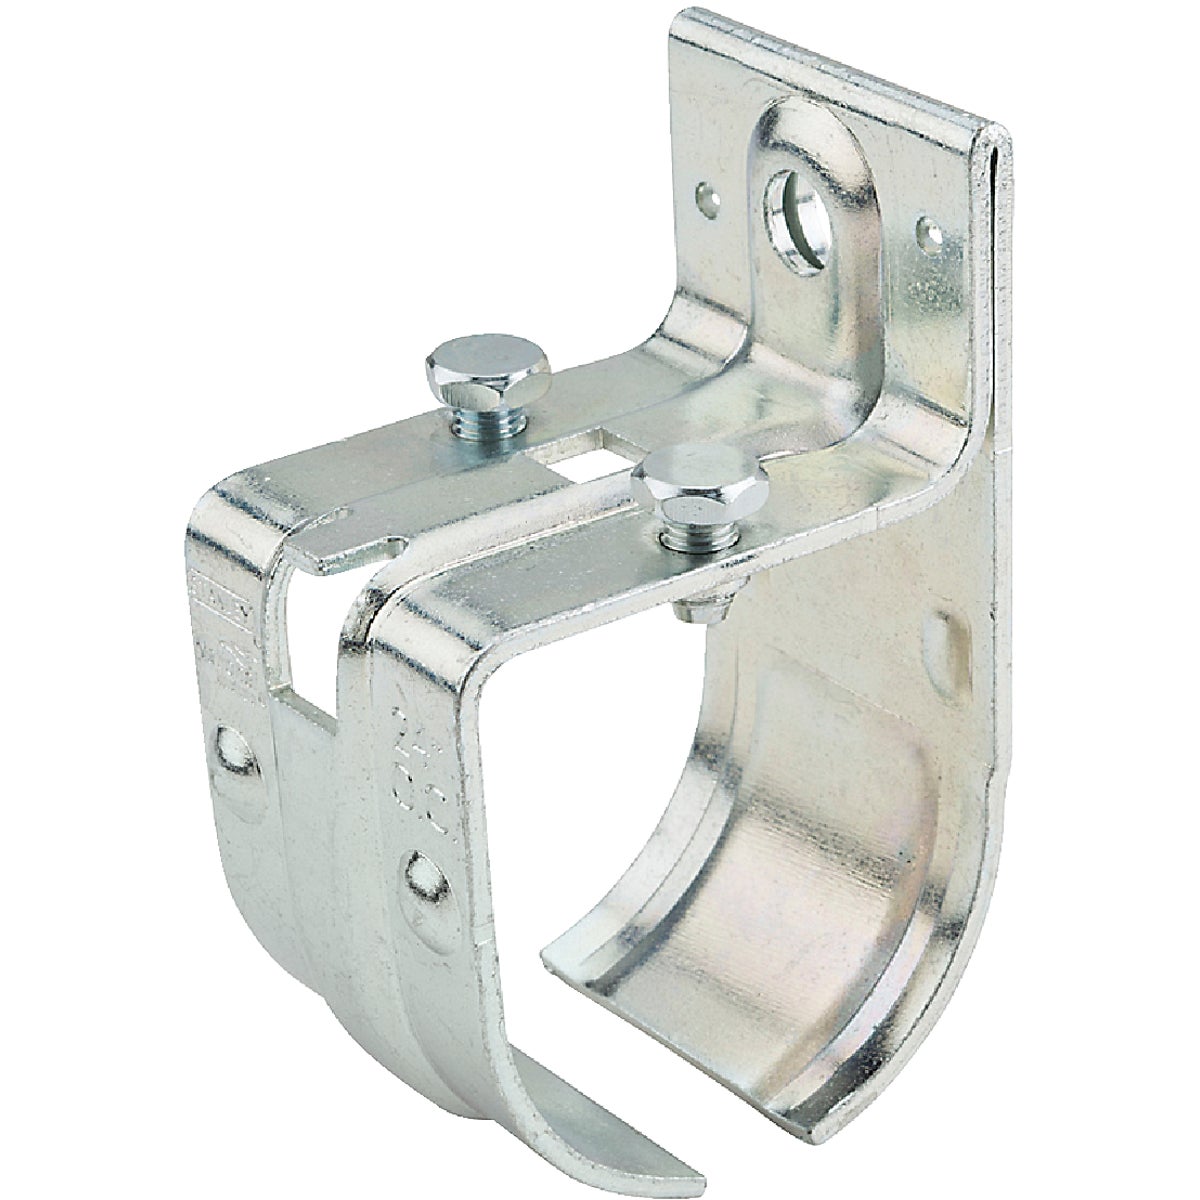 Item 703223, Adjustable round rail bracket. Designed as a support for #5400 round rail.